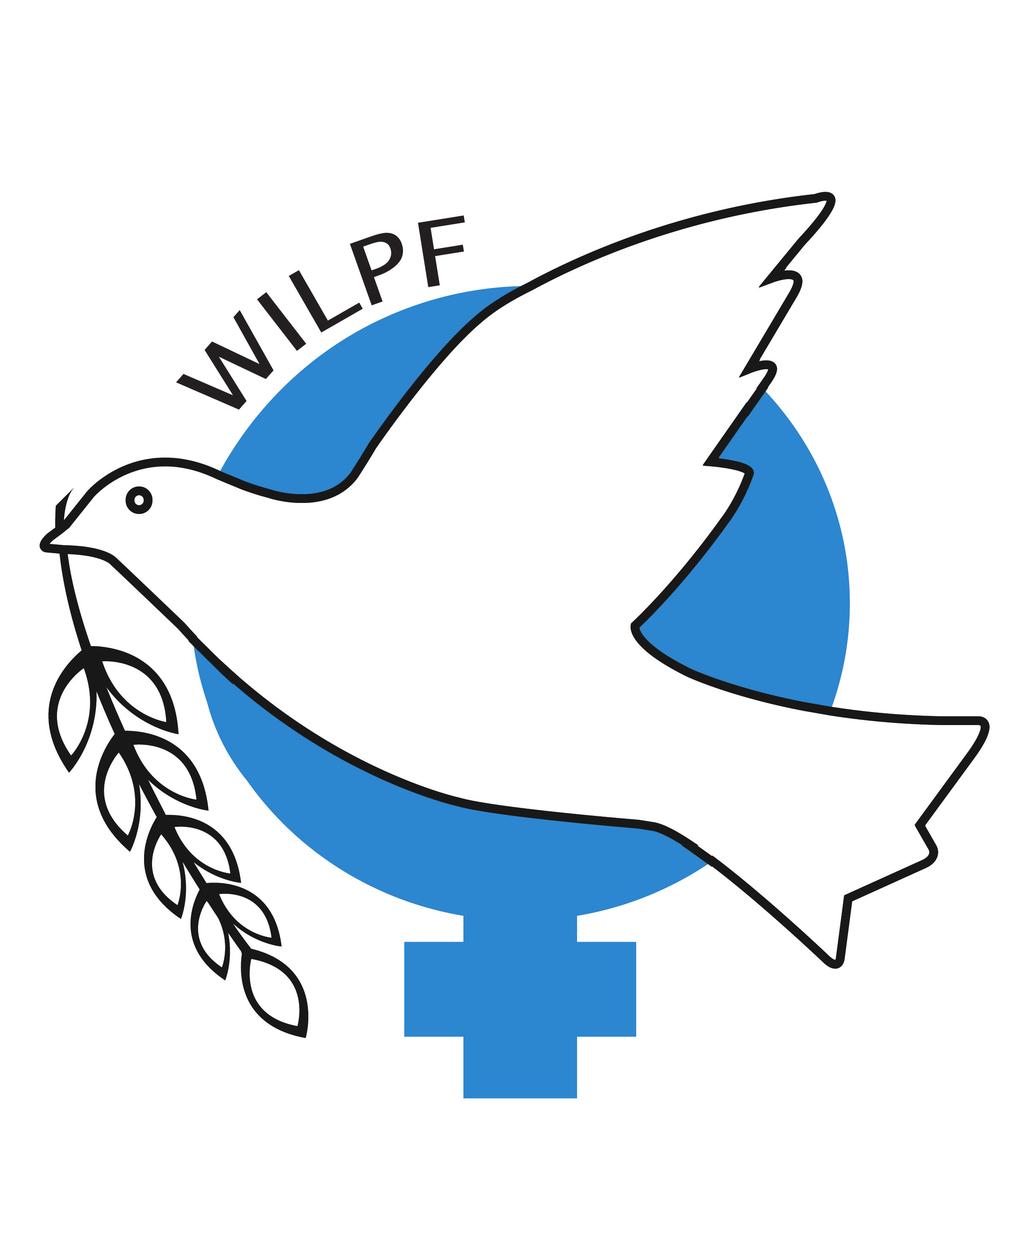 WILPF RESOLUTIONS 23rd Congress Zeist, Netherlands July 23 29, 1986 Australian Aborigines (from Resolution on The Right of All Indigenous Peoples to Own and Control Both their Land(s) and their Lives.